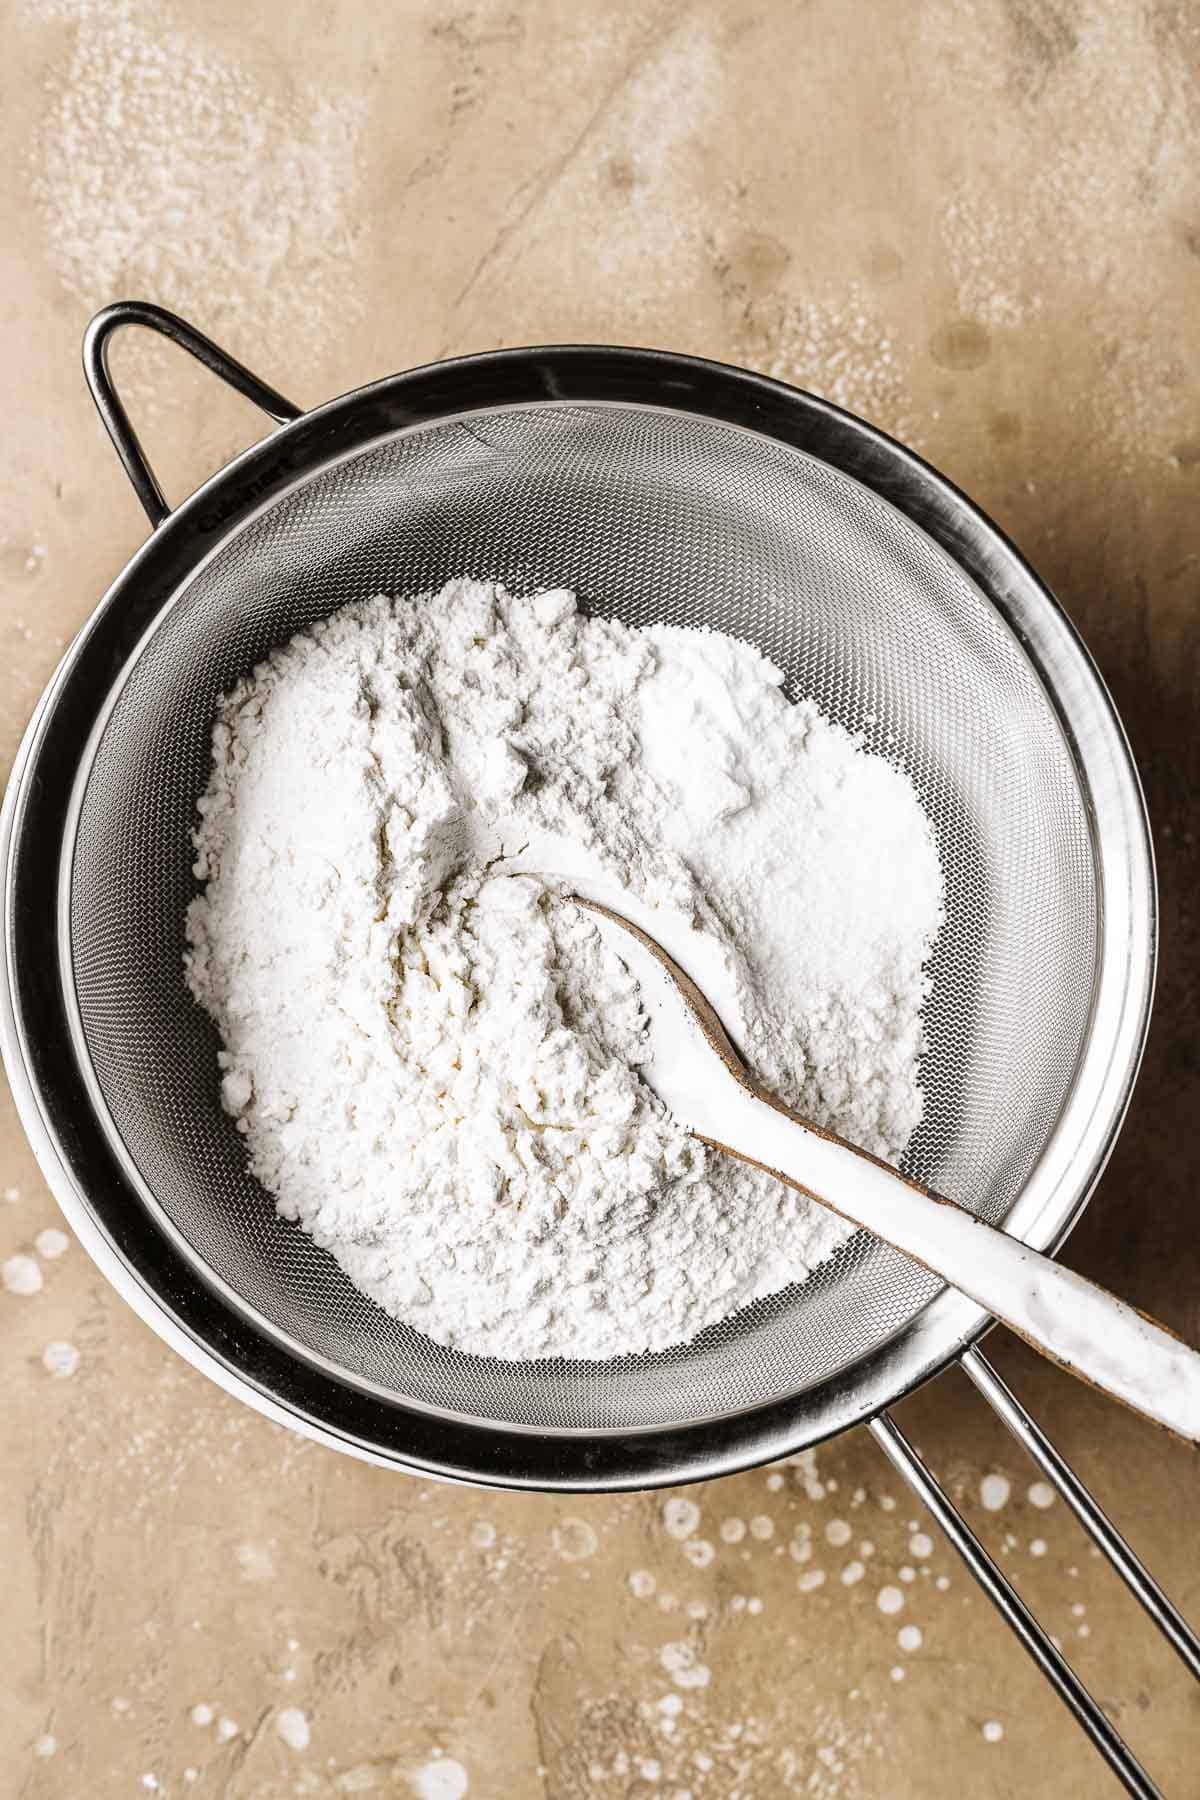 A metal sieve filled with flour, baking soda and salt over a white ceramic bowl. A ceramic spoon rests in the flour mixture.